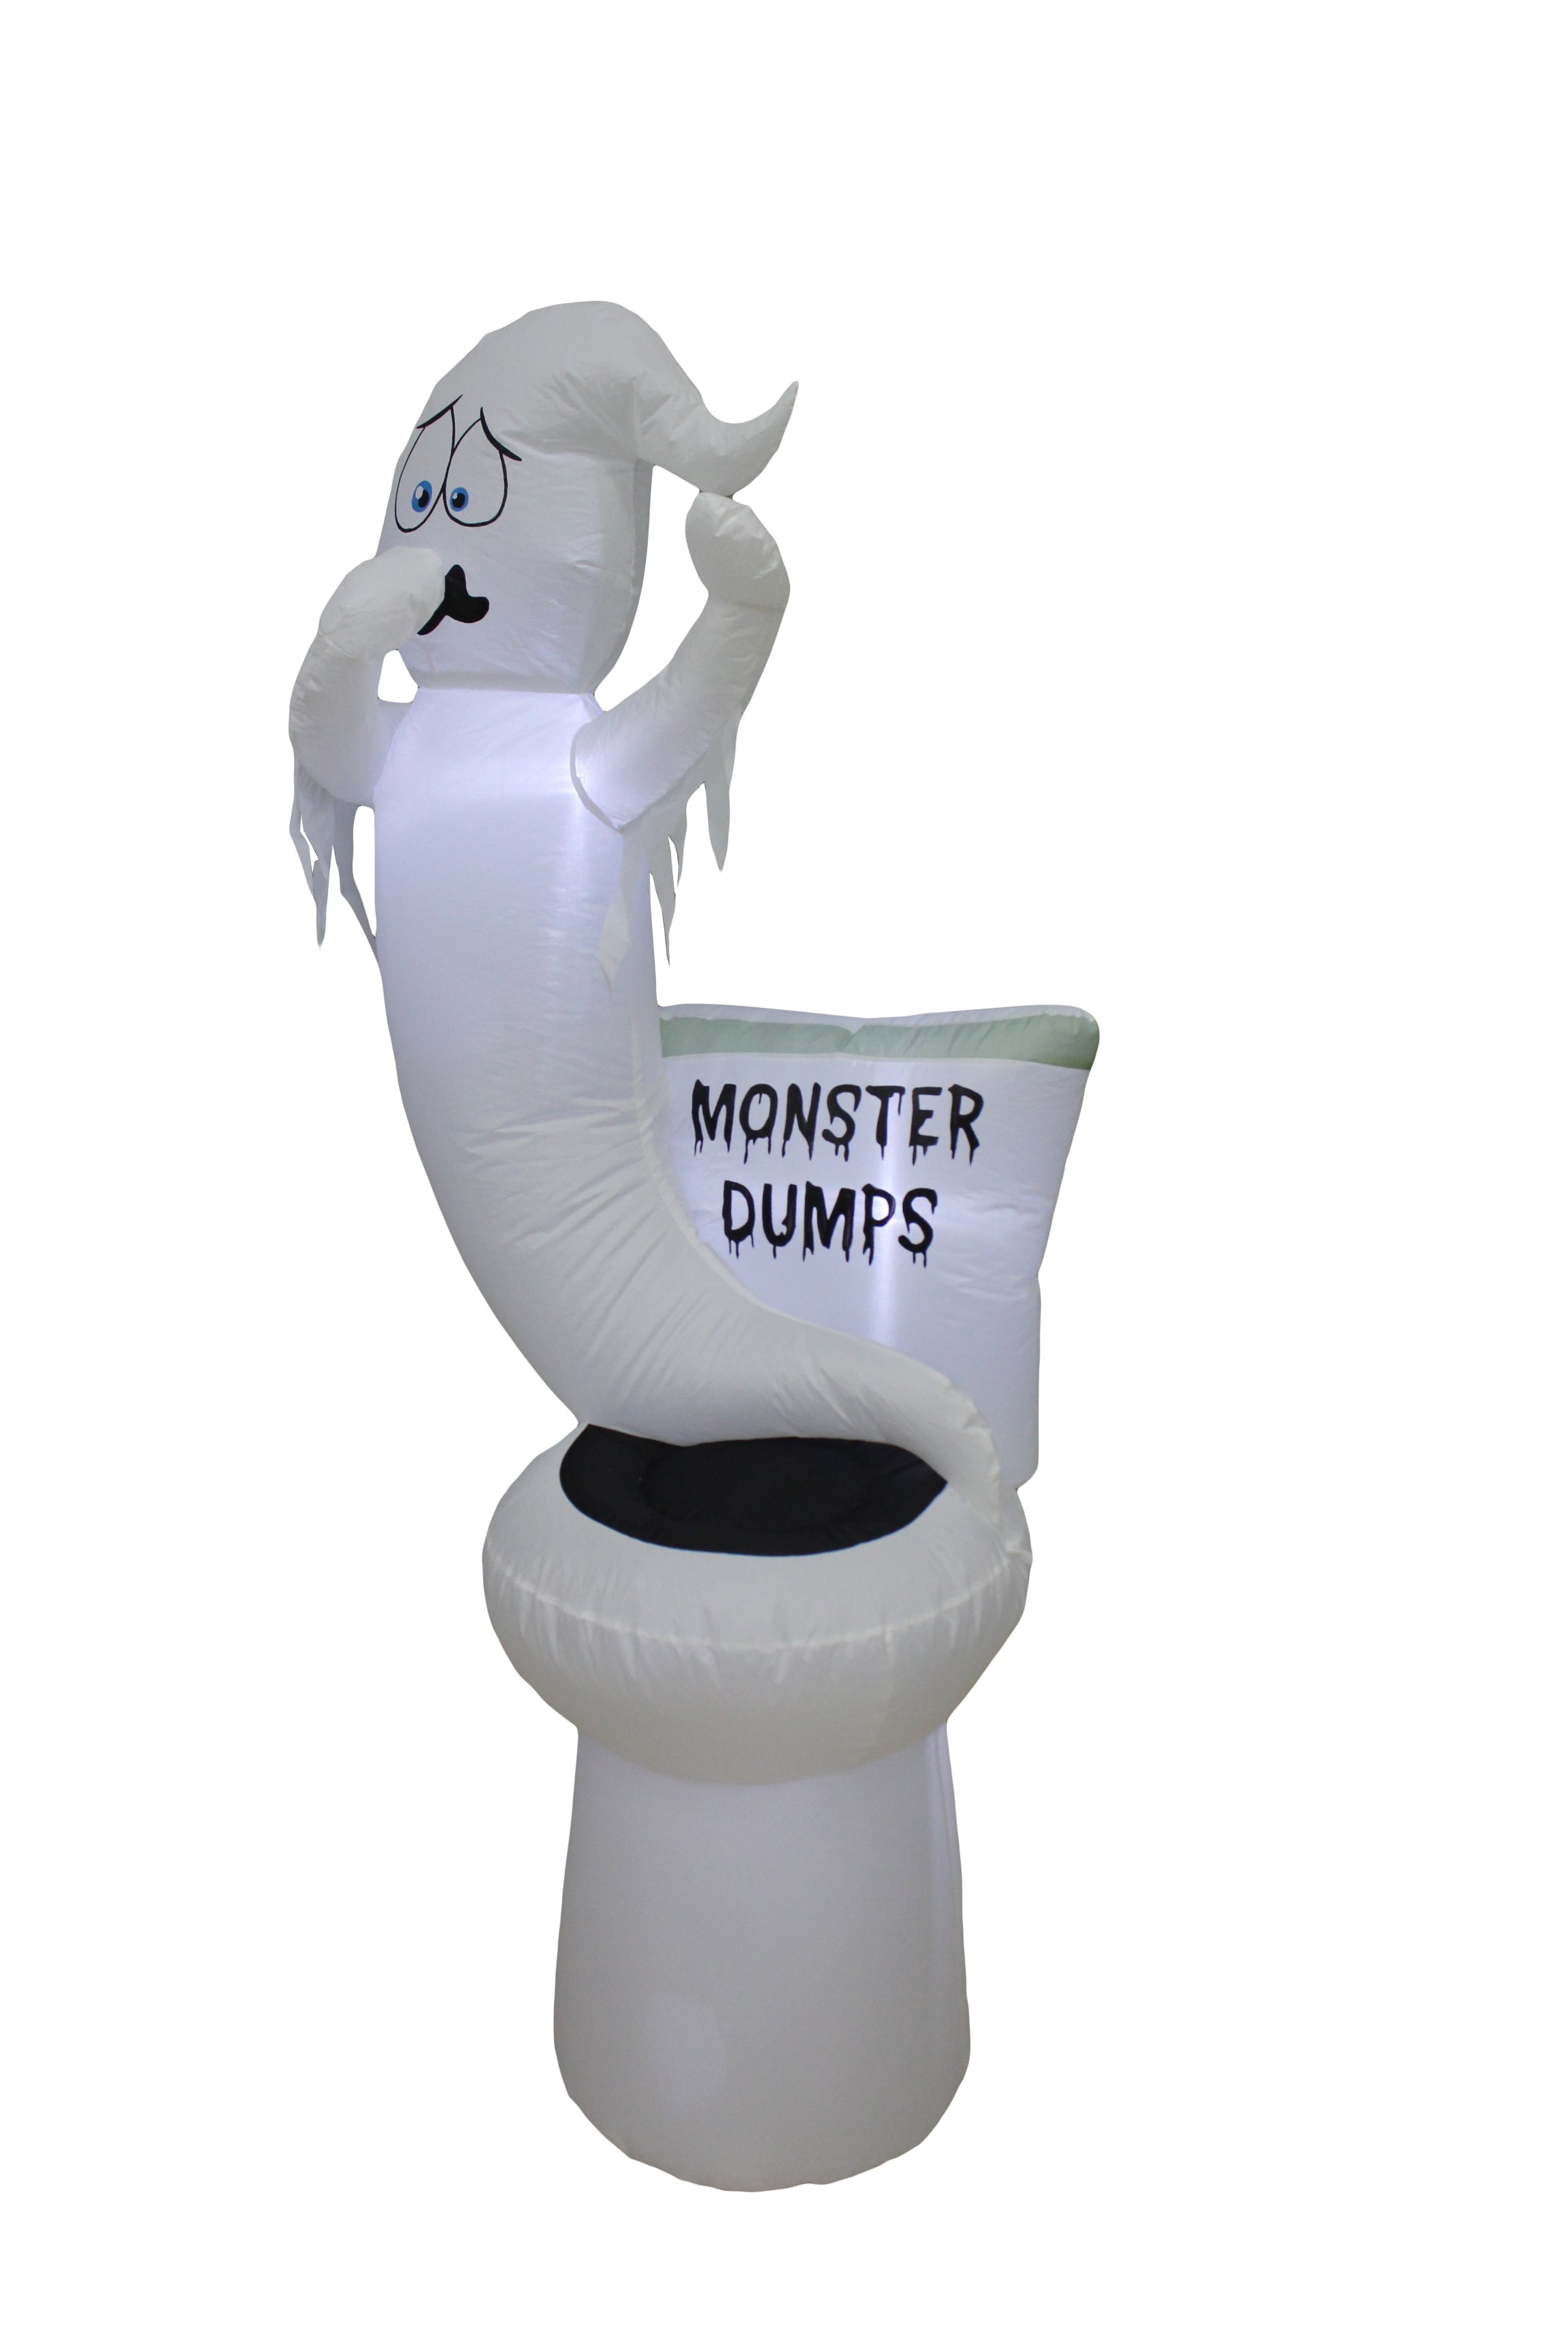 A Holiday Company 5ft Inflatable Glowing Toilet Monster Dumps, Ta Seasons Inflatables